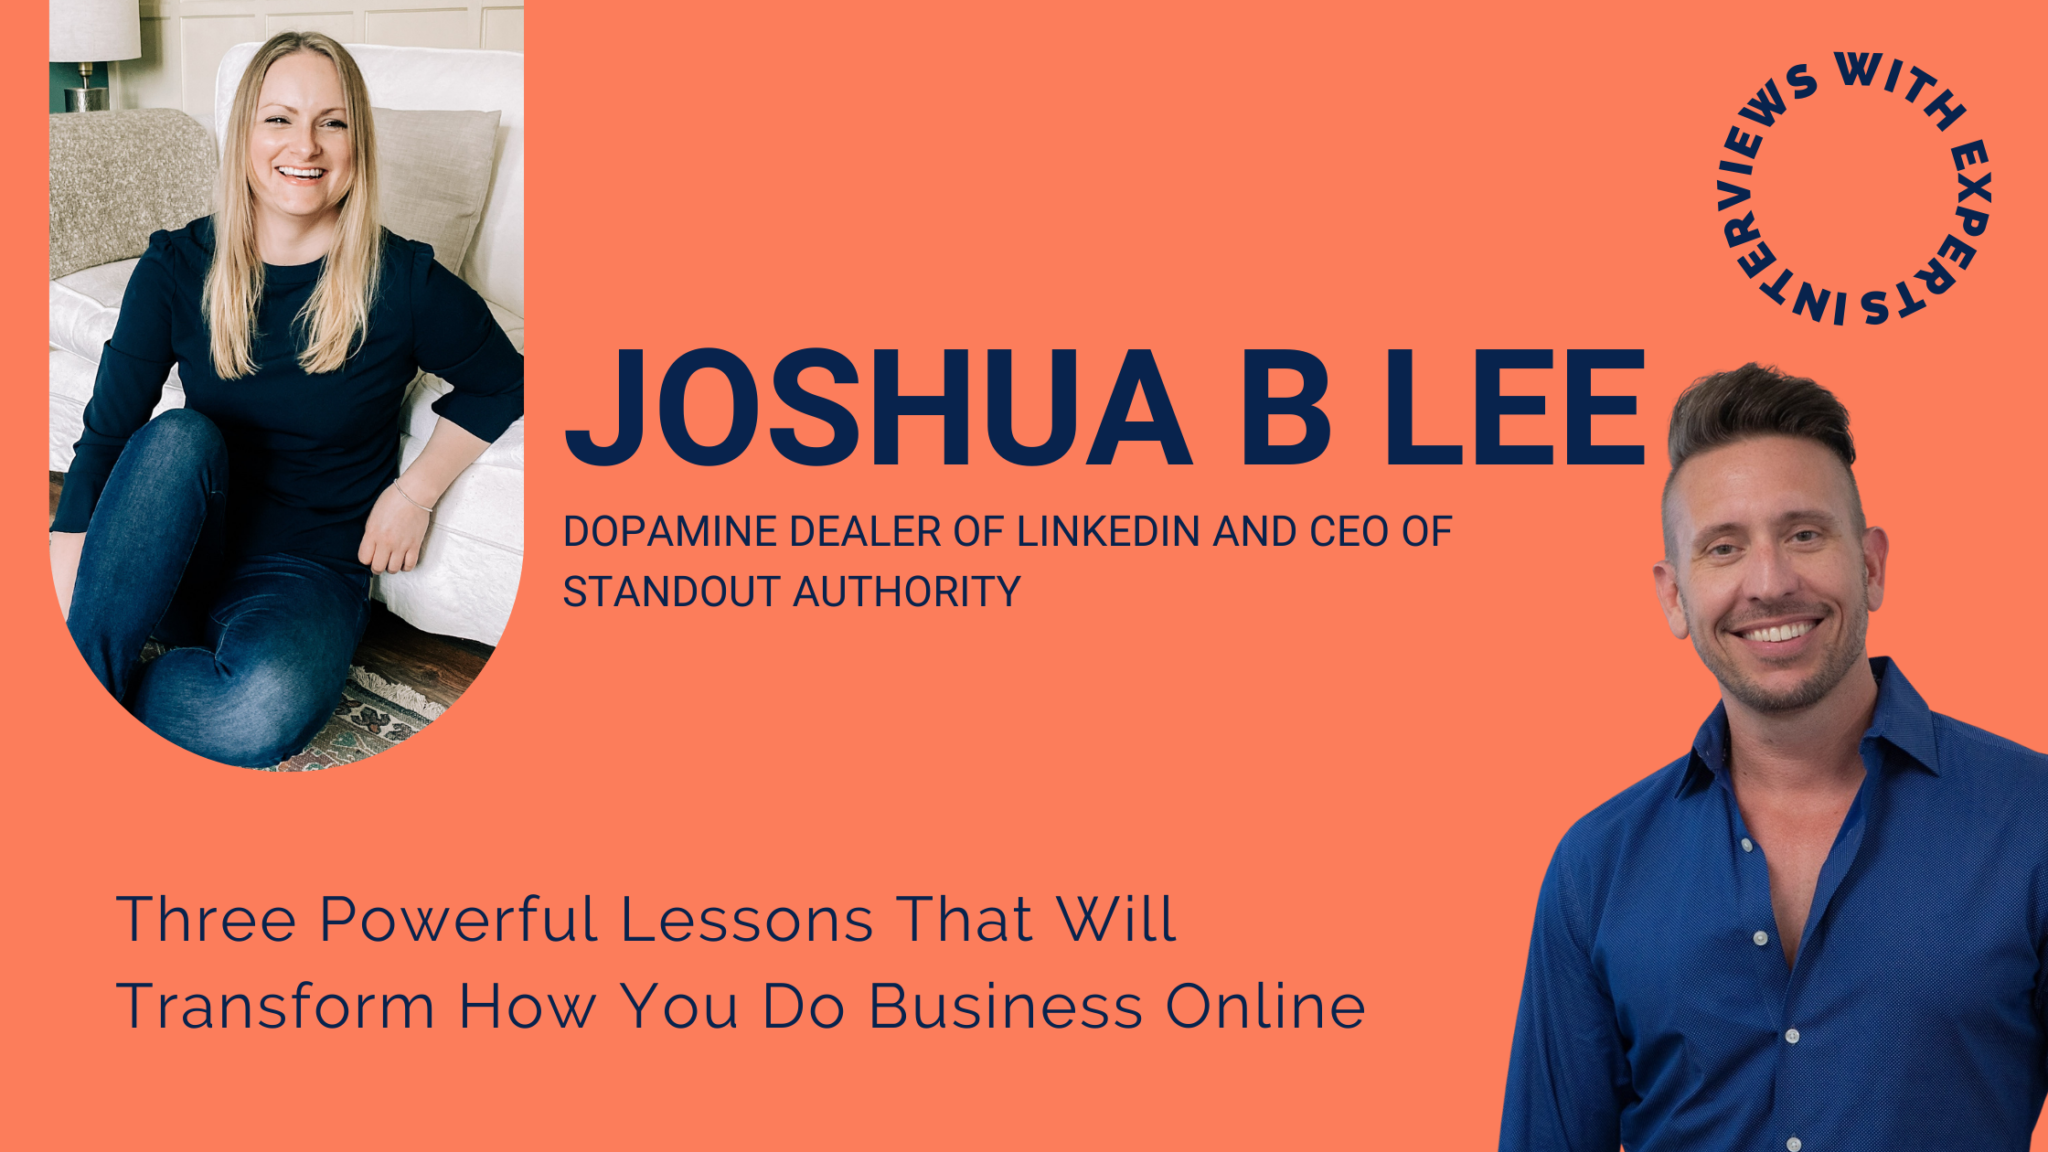 Three Powerful Lessons That Will Transform How You Do Business Online with Georgia Kirke and Special Guest Joshua B Lee